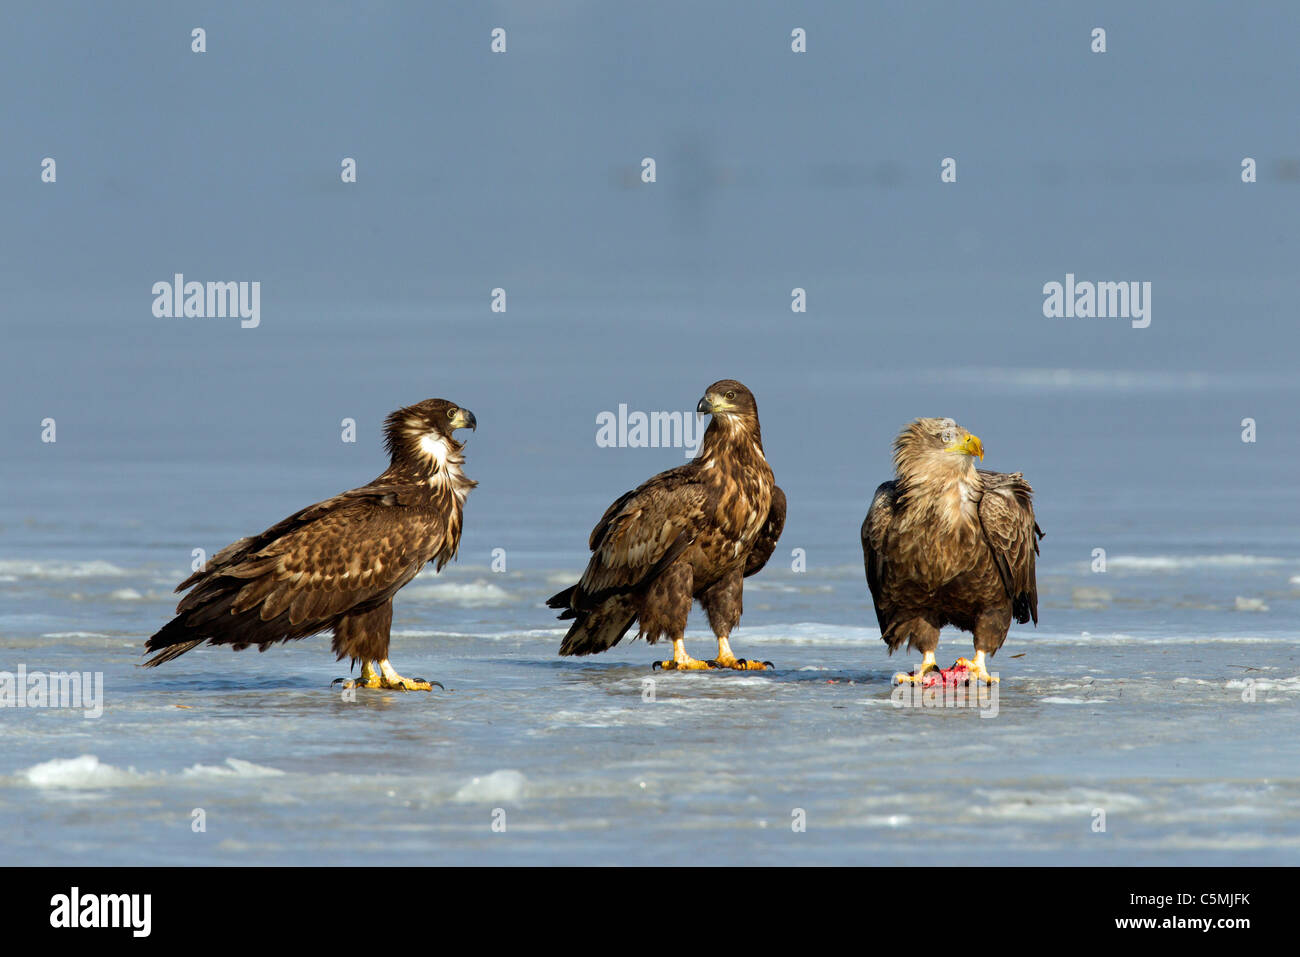 White-Tailed Eagle (Haliaeetus albicilla). Adult and two juveniles standing on ice. Stock Photo